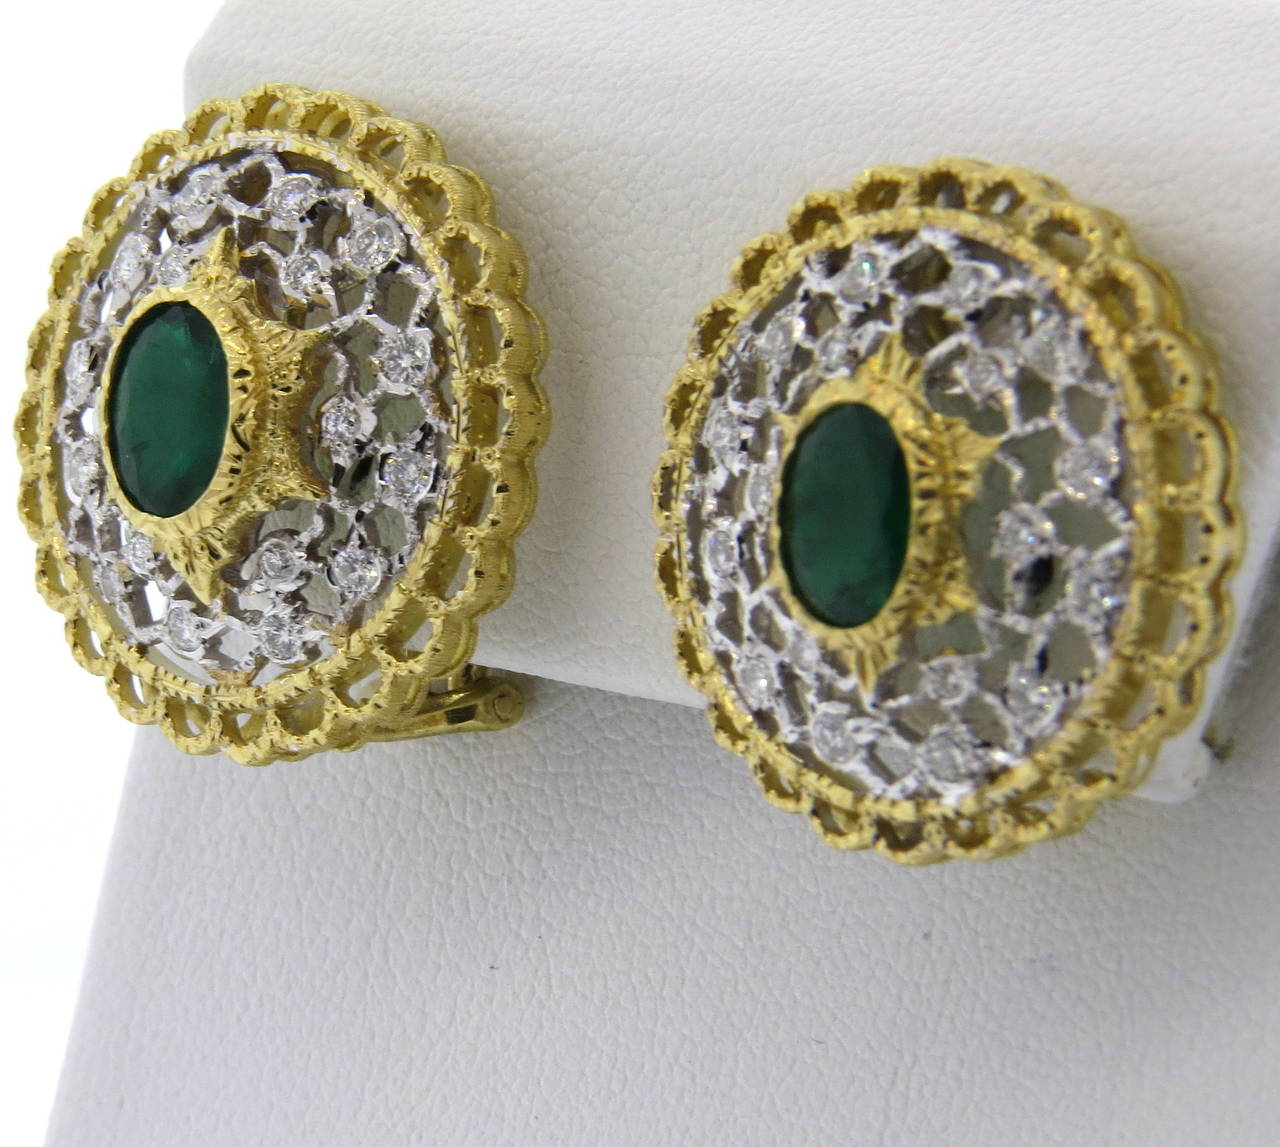 A pair of intricate 18k yellow and white gold earrings set with approx. 0.40ctw in diamonds and two emeralds approx. 1.66ctw.  Crafted by Mario Buccellati, the earrings measure 25mm in diameter and weigh 15 grams.